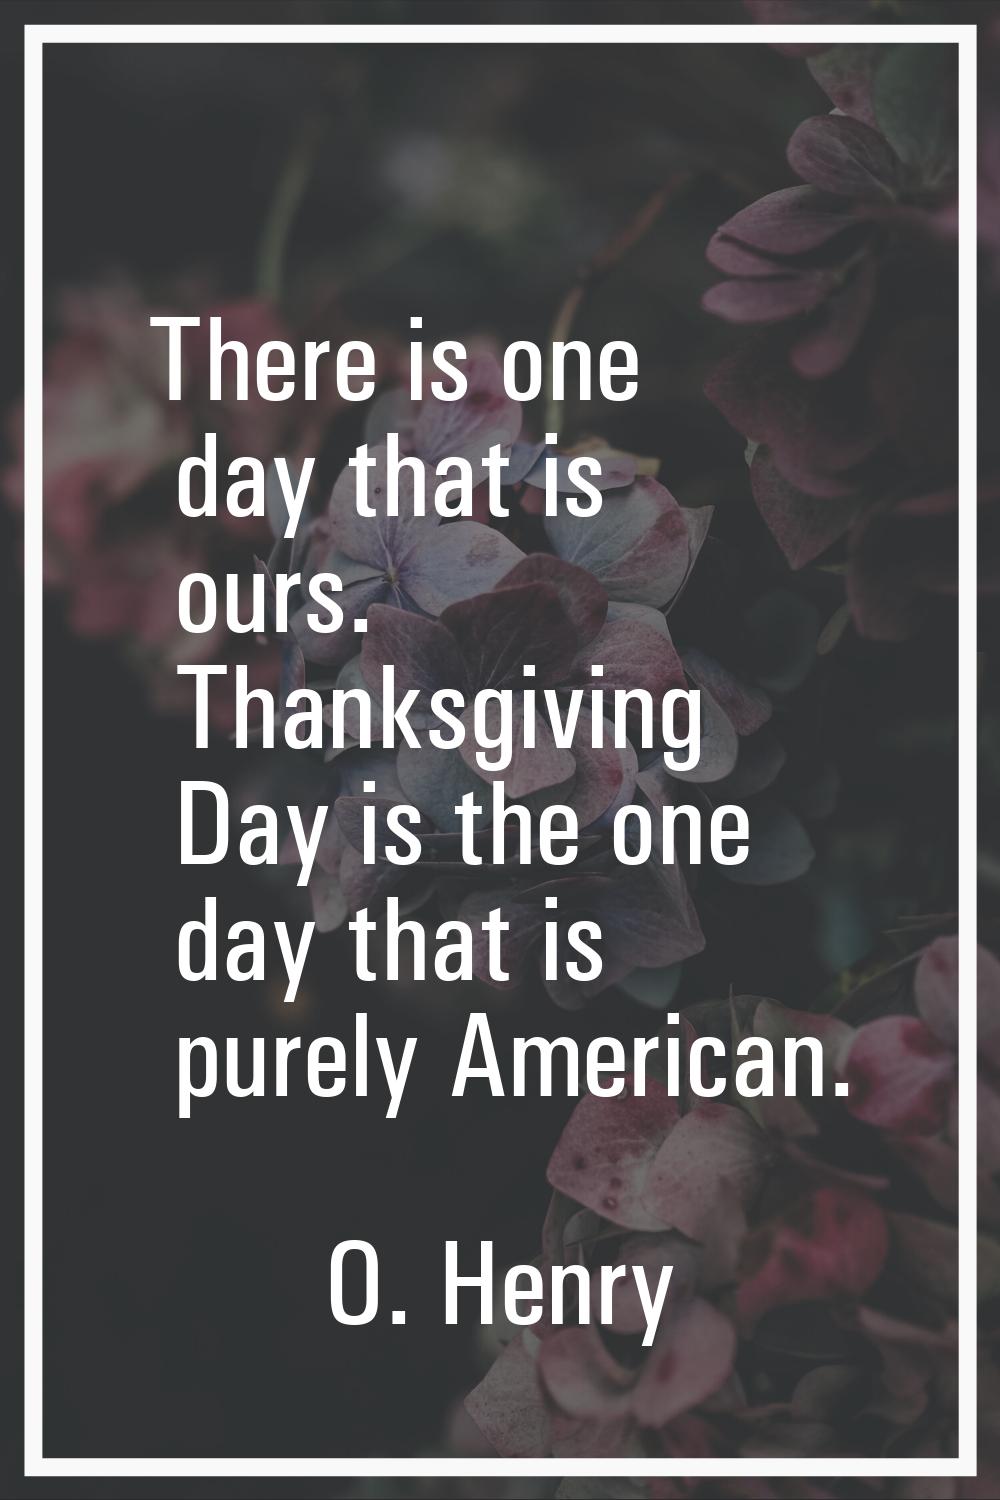 There is one day that is ours. Thanksgiving Day is the one day that is purely American.